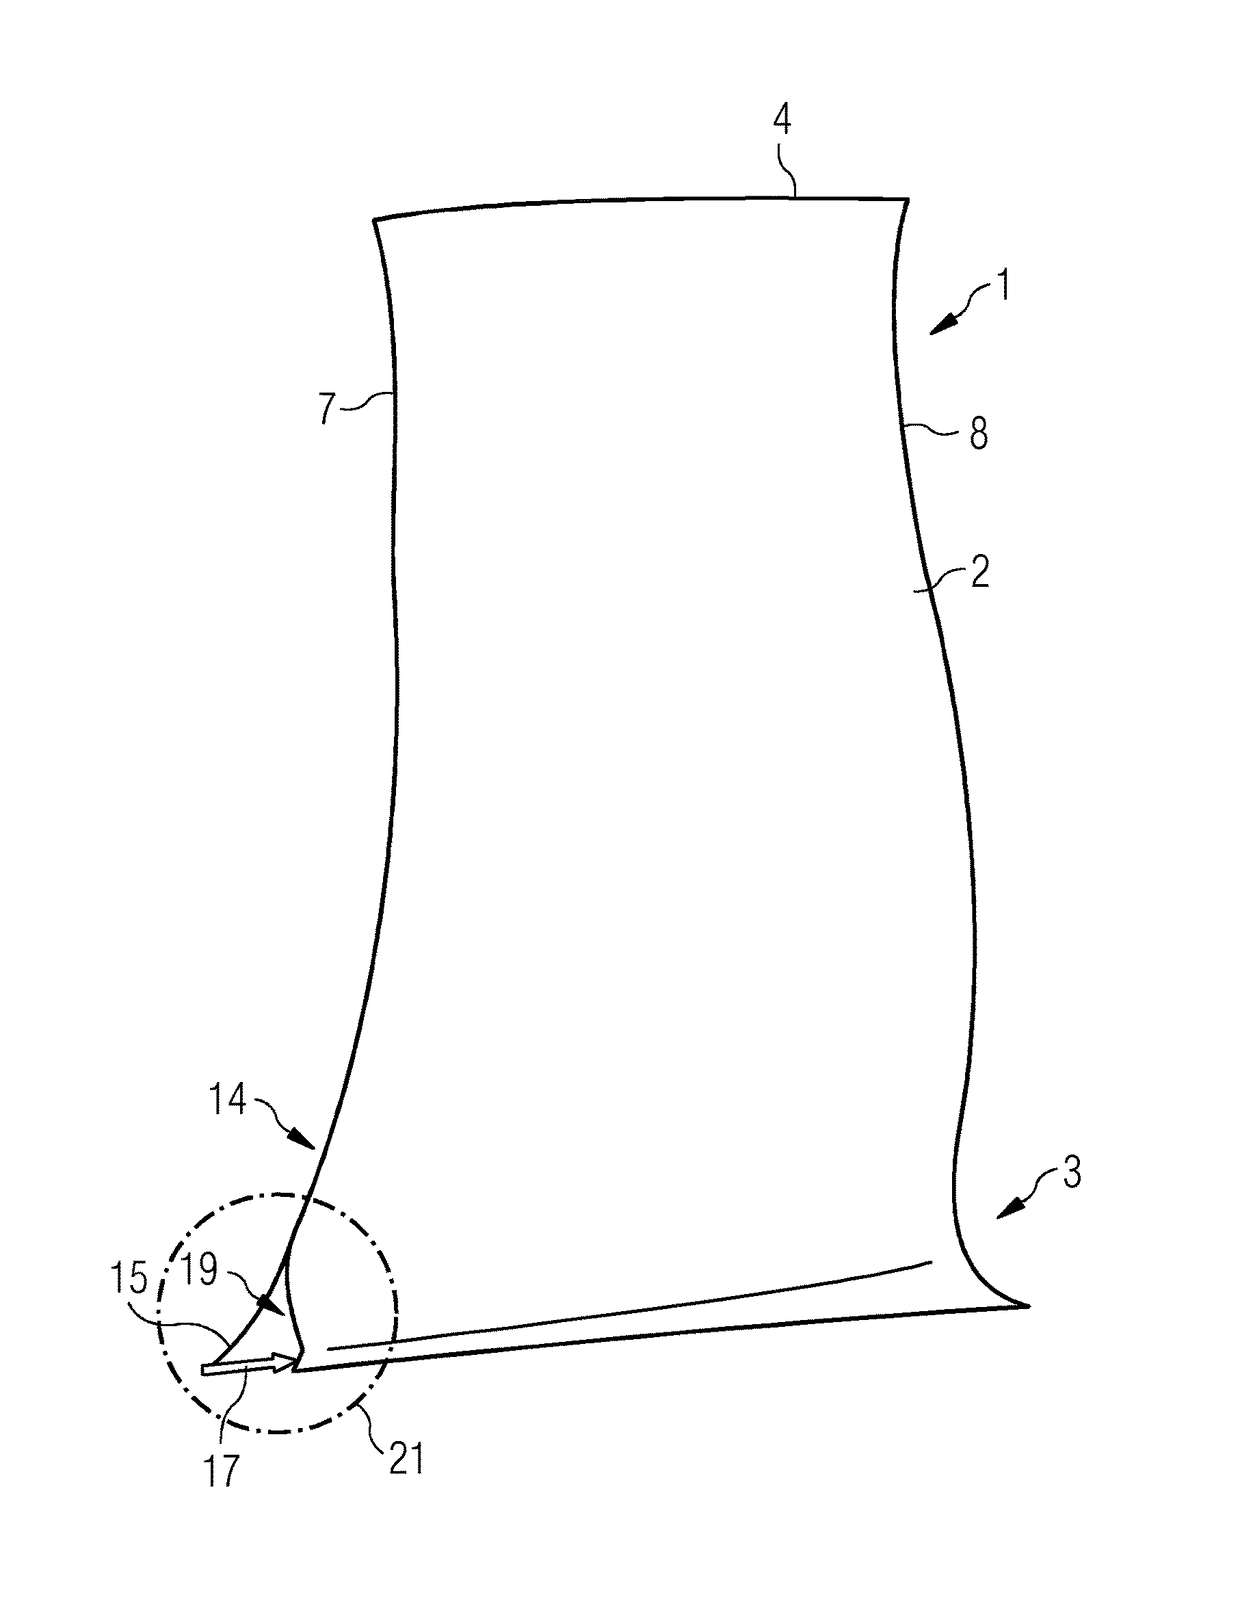 Method for profiling a replacement blade as a replacement part for an old blade for an axial-flow turbomachine